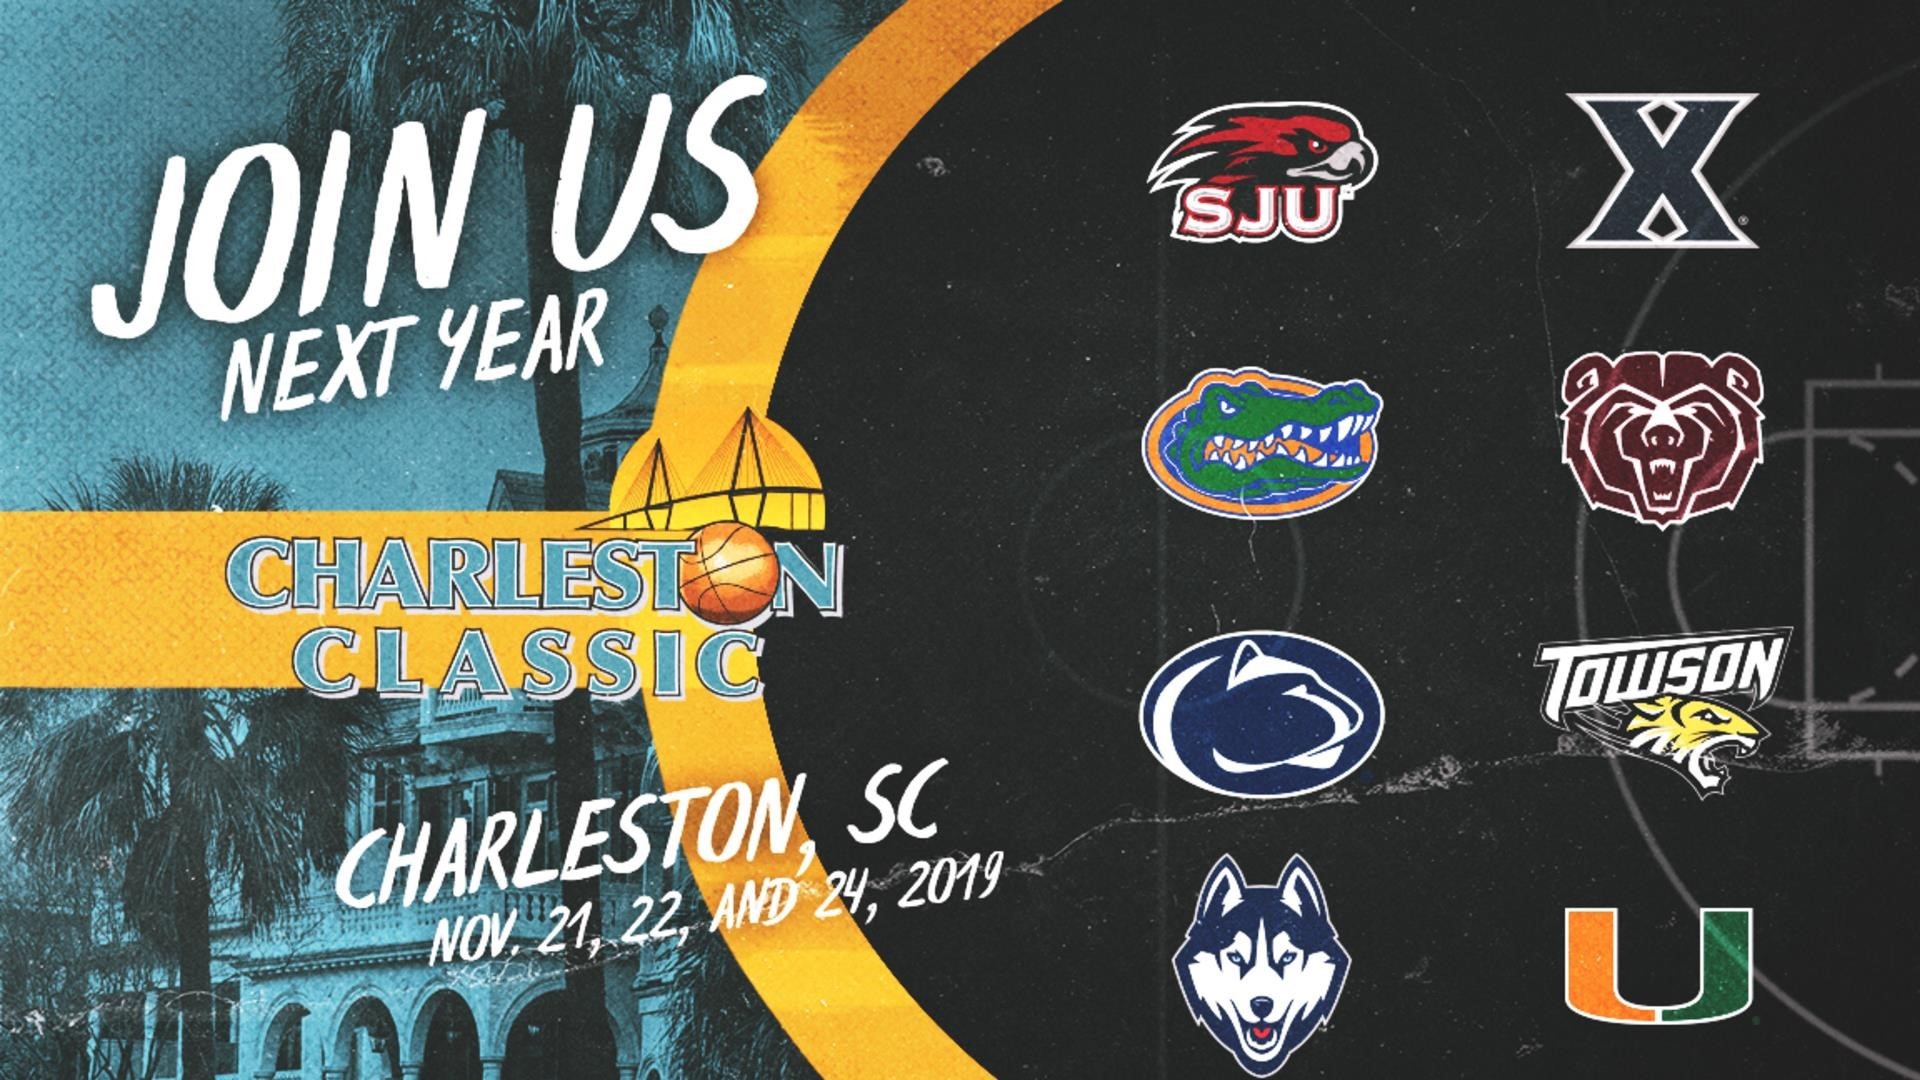 1920x1080 UConn To Participate In 2019 Charleston Classic - University of Connecticut  Athletics